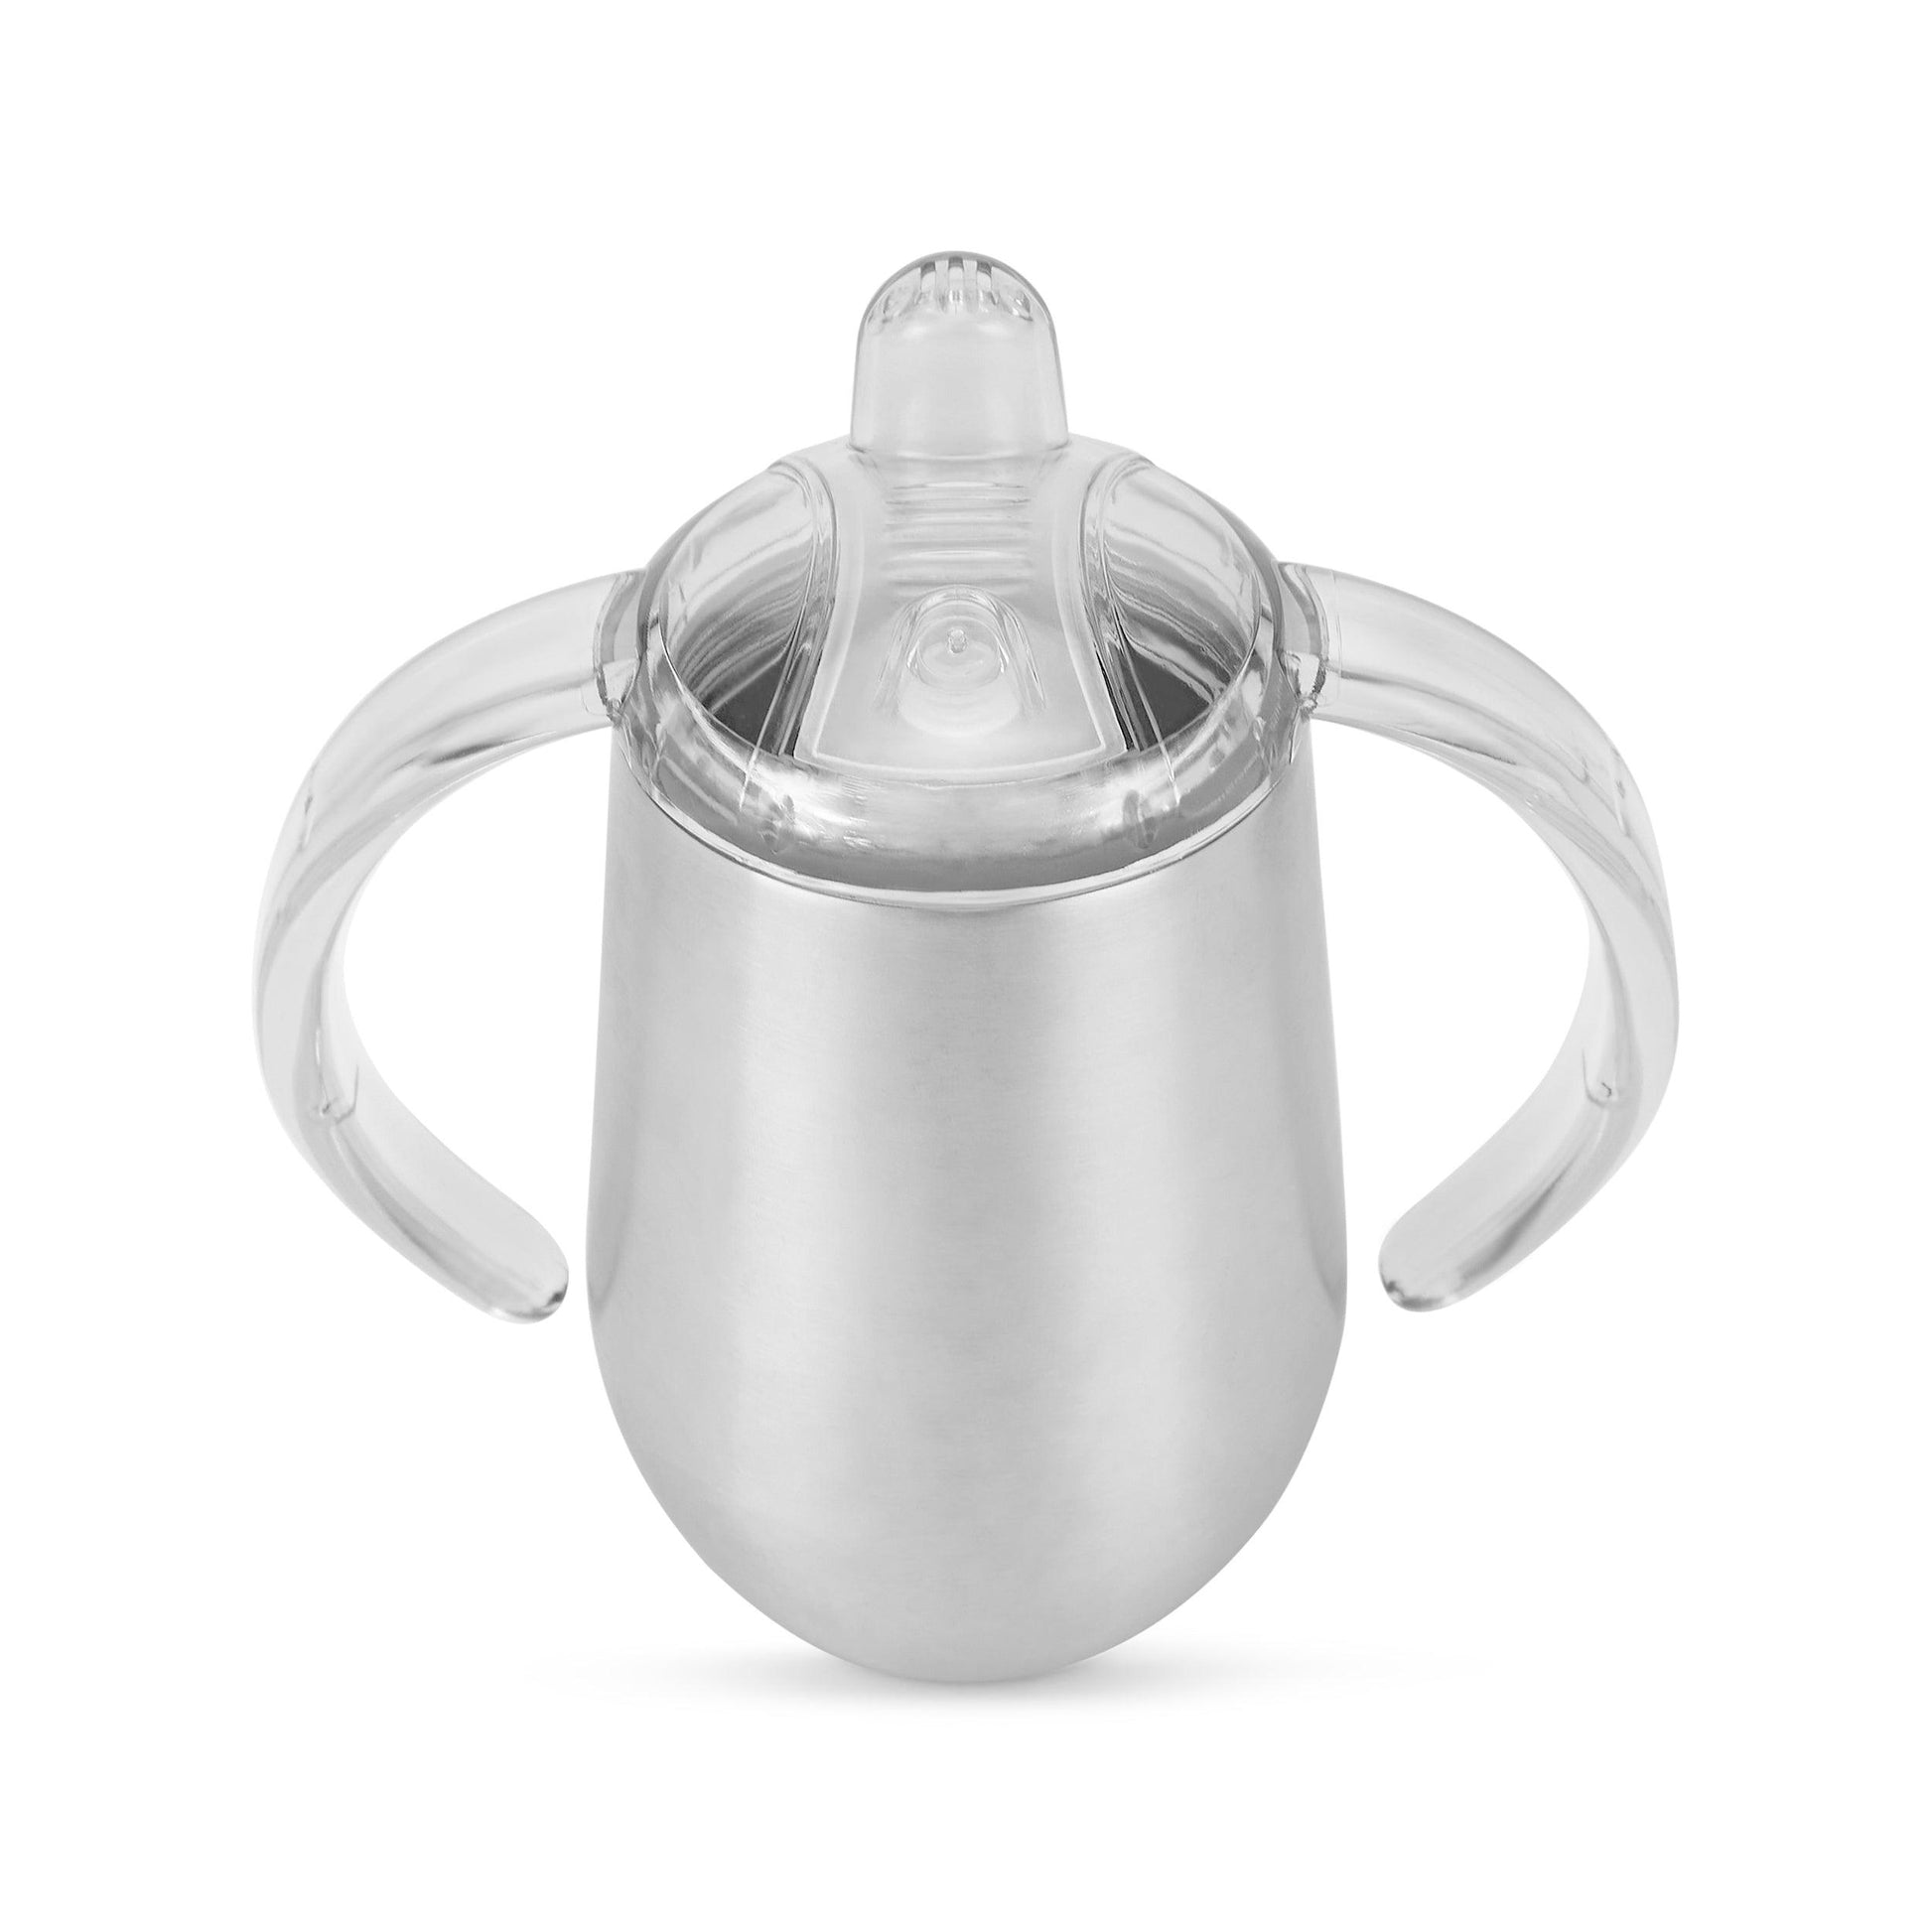 MakerFlo Crafts Straight Sippy Cup, with 2 Lid Options, Stainless Steel, 12oz